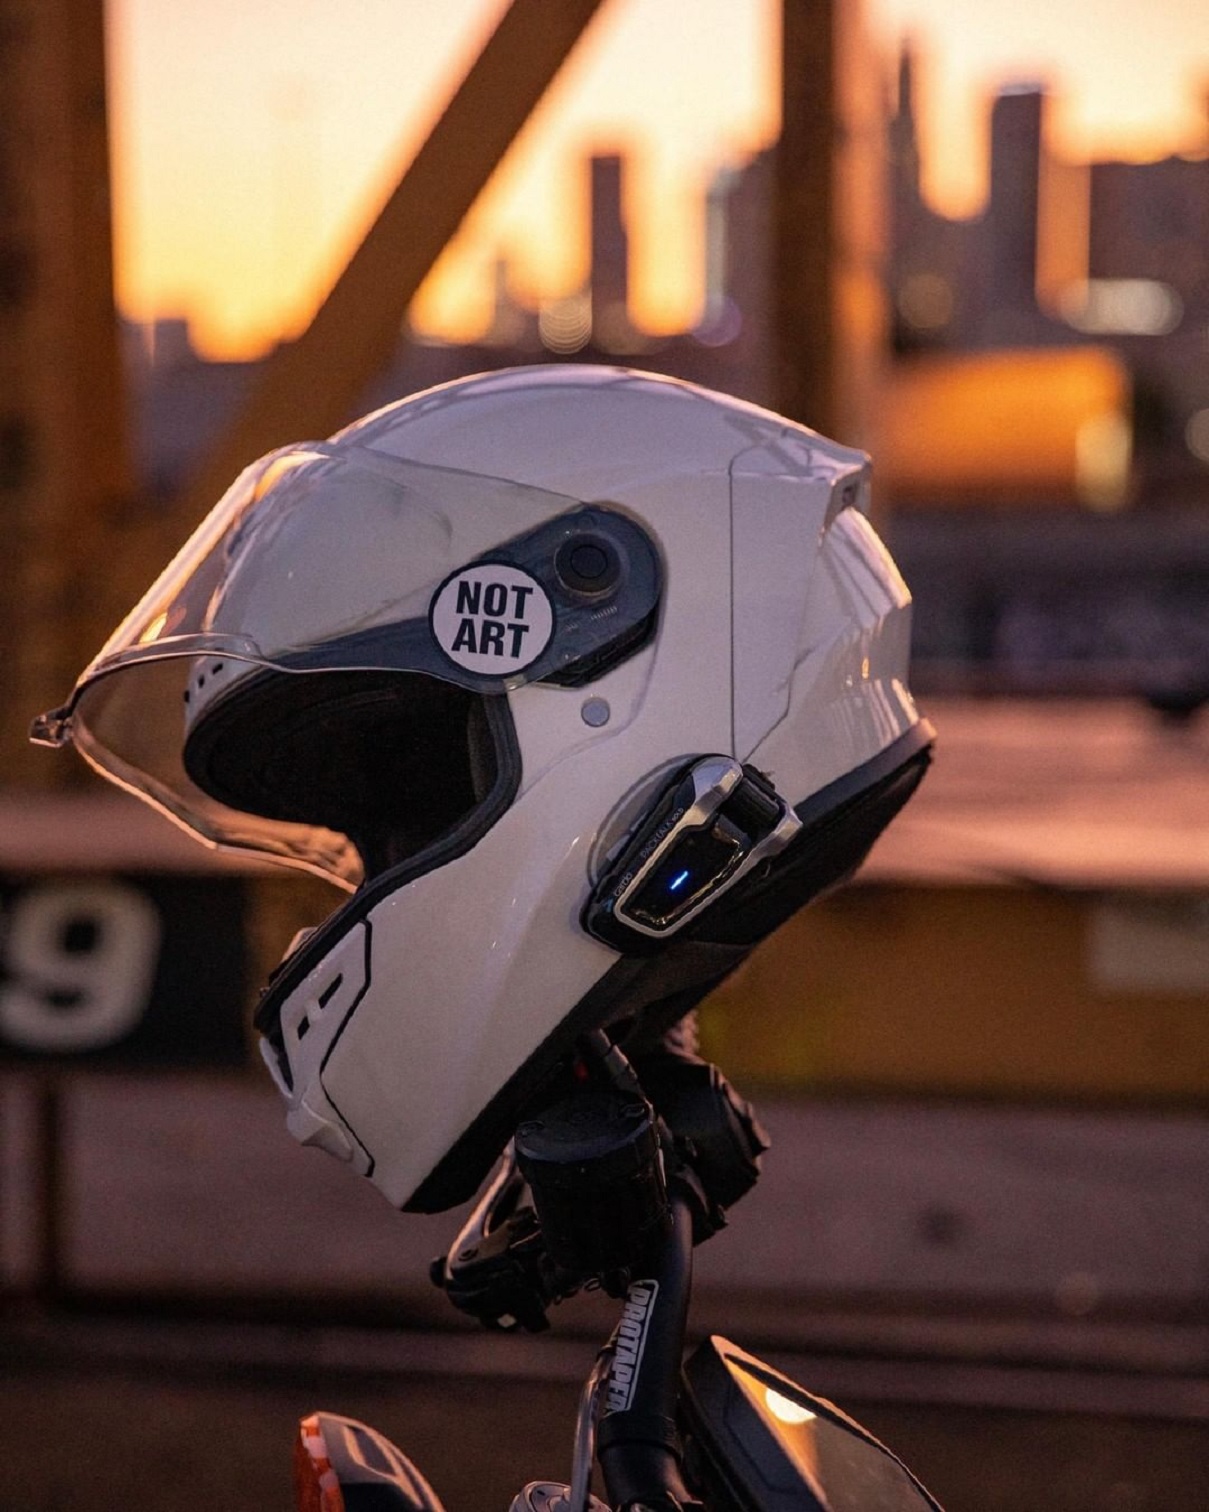 Motorcycle Helmet Communications Are More Than Just Bluetooth